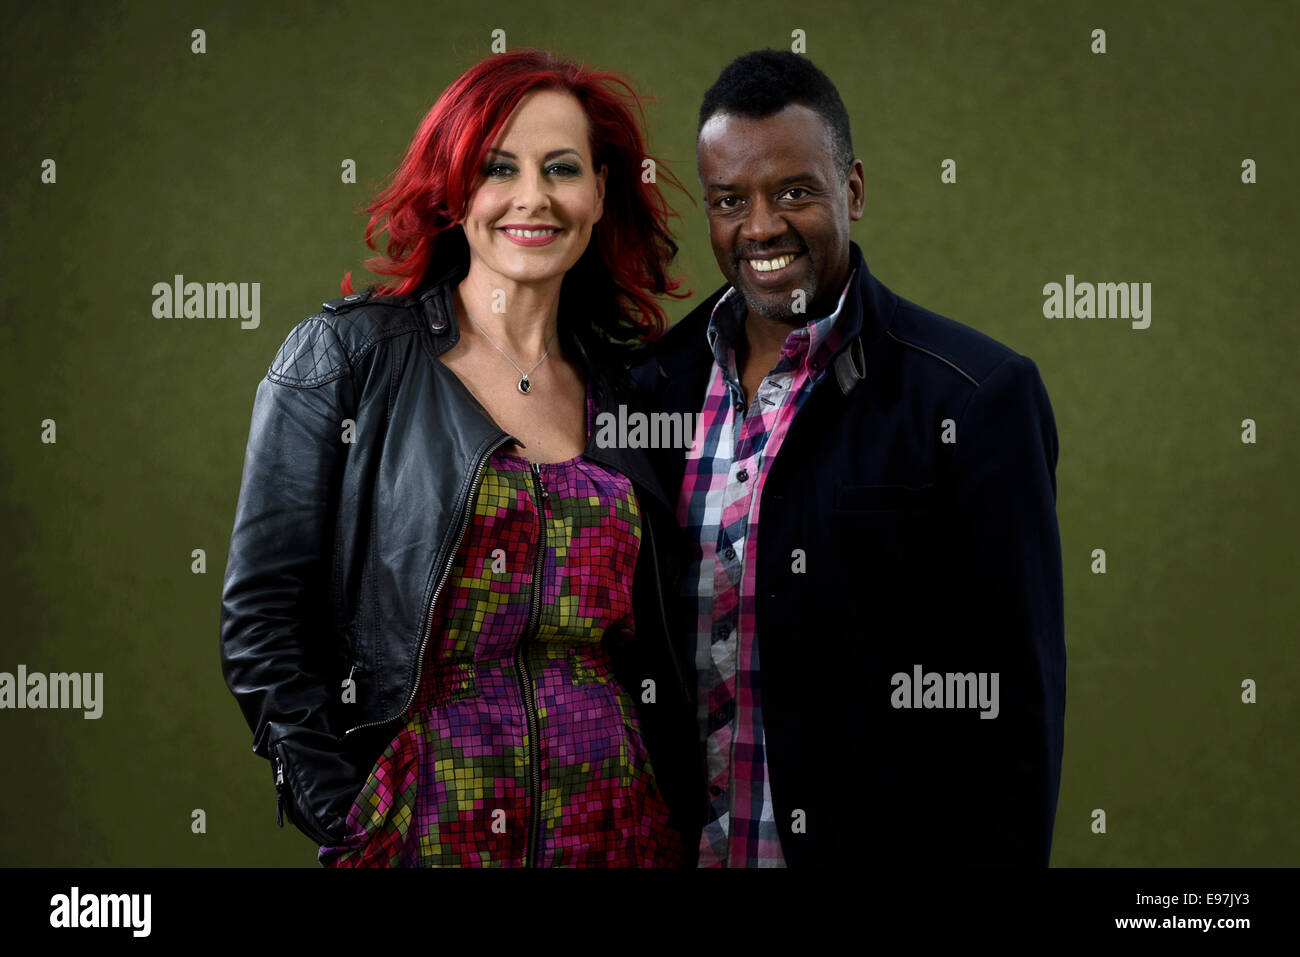 Vocal Coaches, judges and TV presenters David and Carrie Grant appear at the Edinburgh International Book Festival. Stock Photo